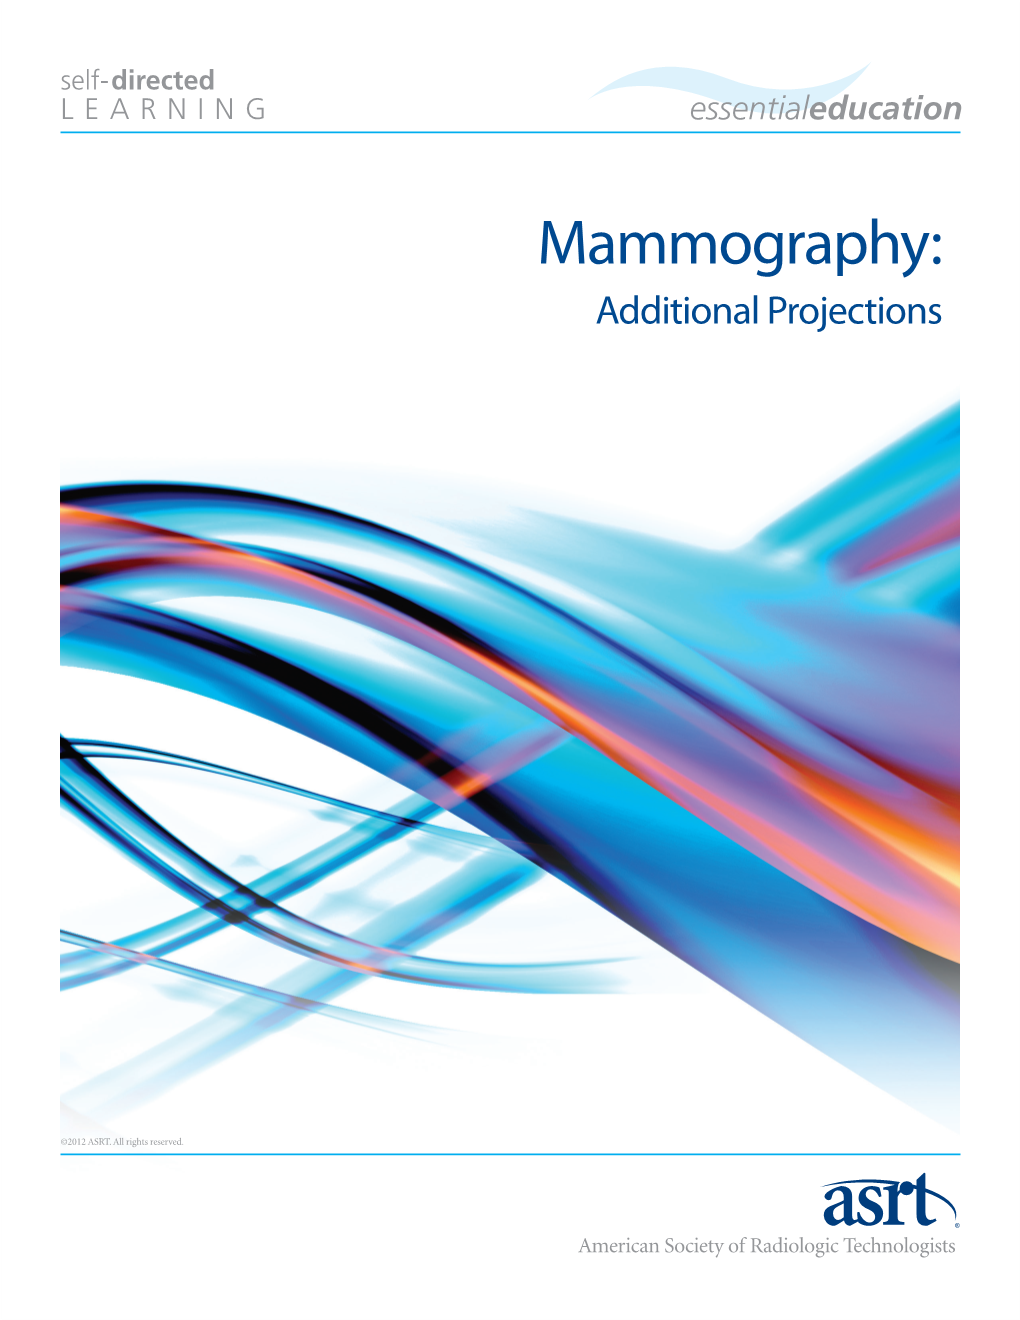 Mammography: Additional Projections